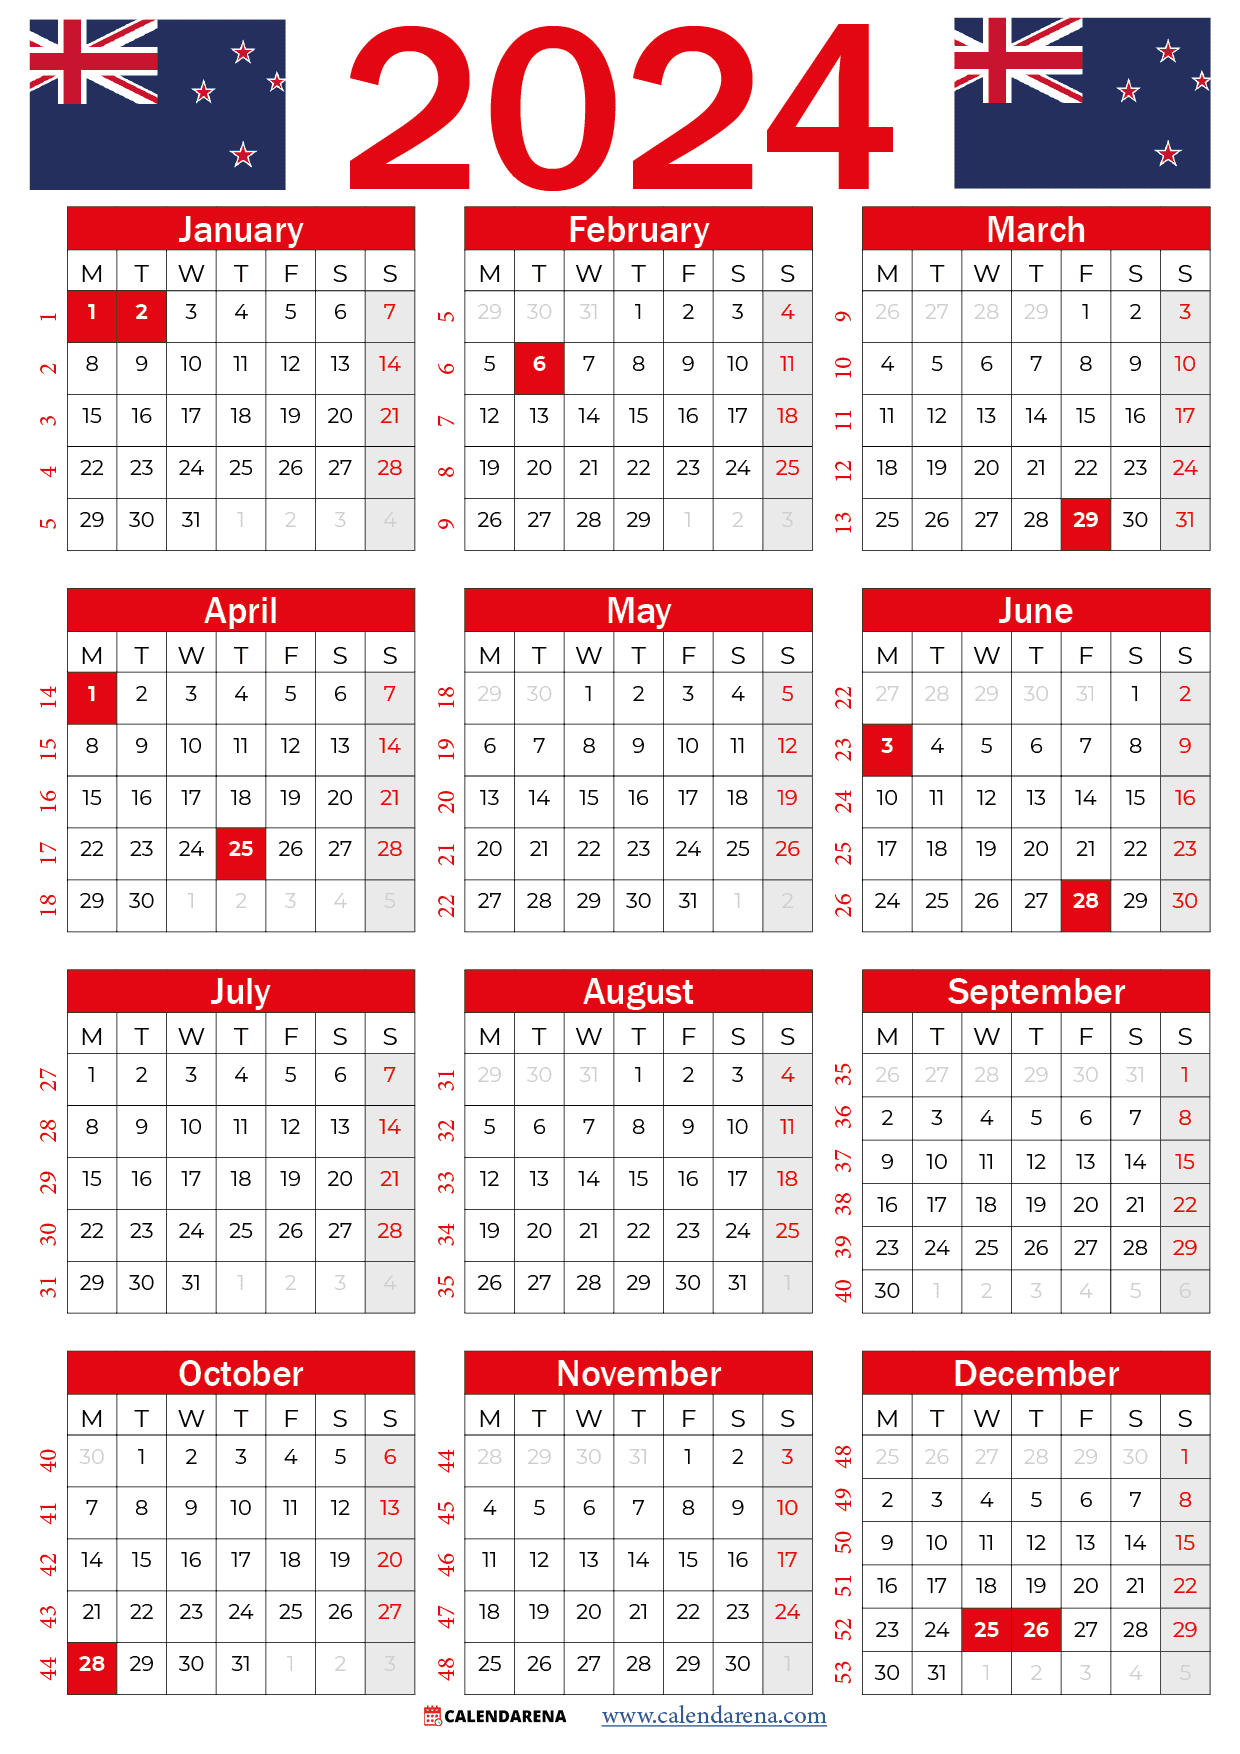 Calendar 2024 Nz With Holidays And Festivals for Free Printable Calendar 2024 Nz With Public Holidays